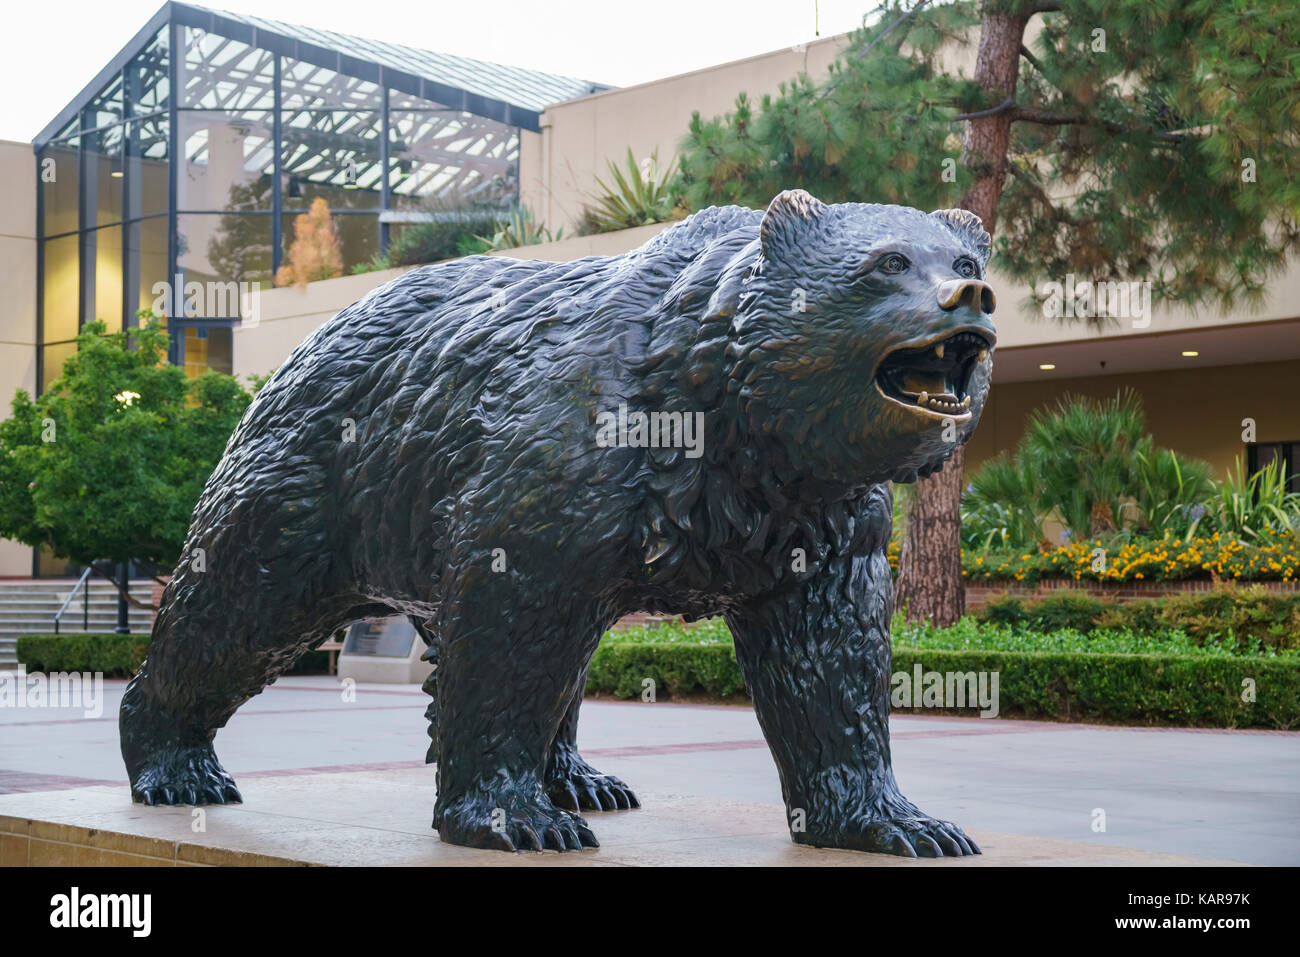 Westwood, JUN 21: UCLA Bruin Statue on JUN 21, 2017 at Westwood, Los Angeles County, California, United States Stock Photo